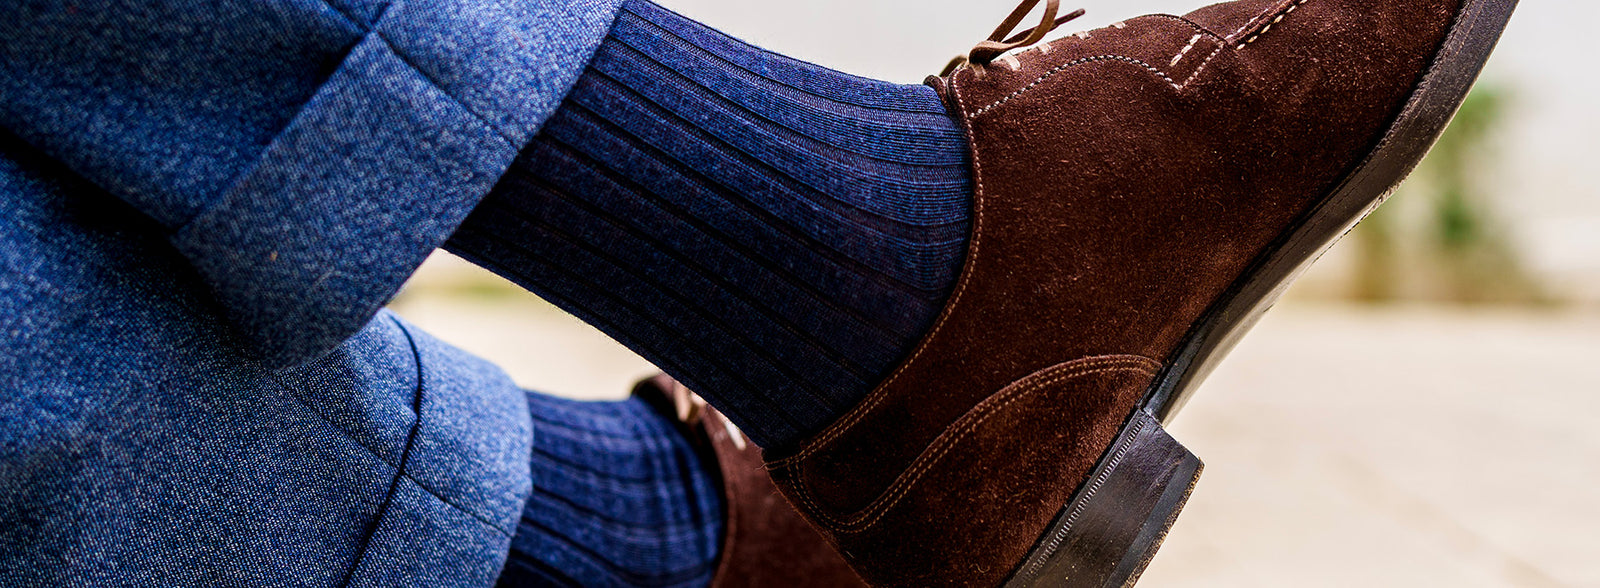 How to Wear Jeans and Dress Shoes - Boardroom Socks